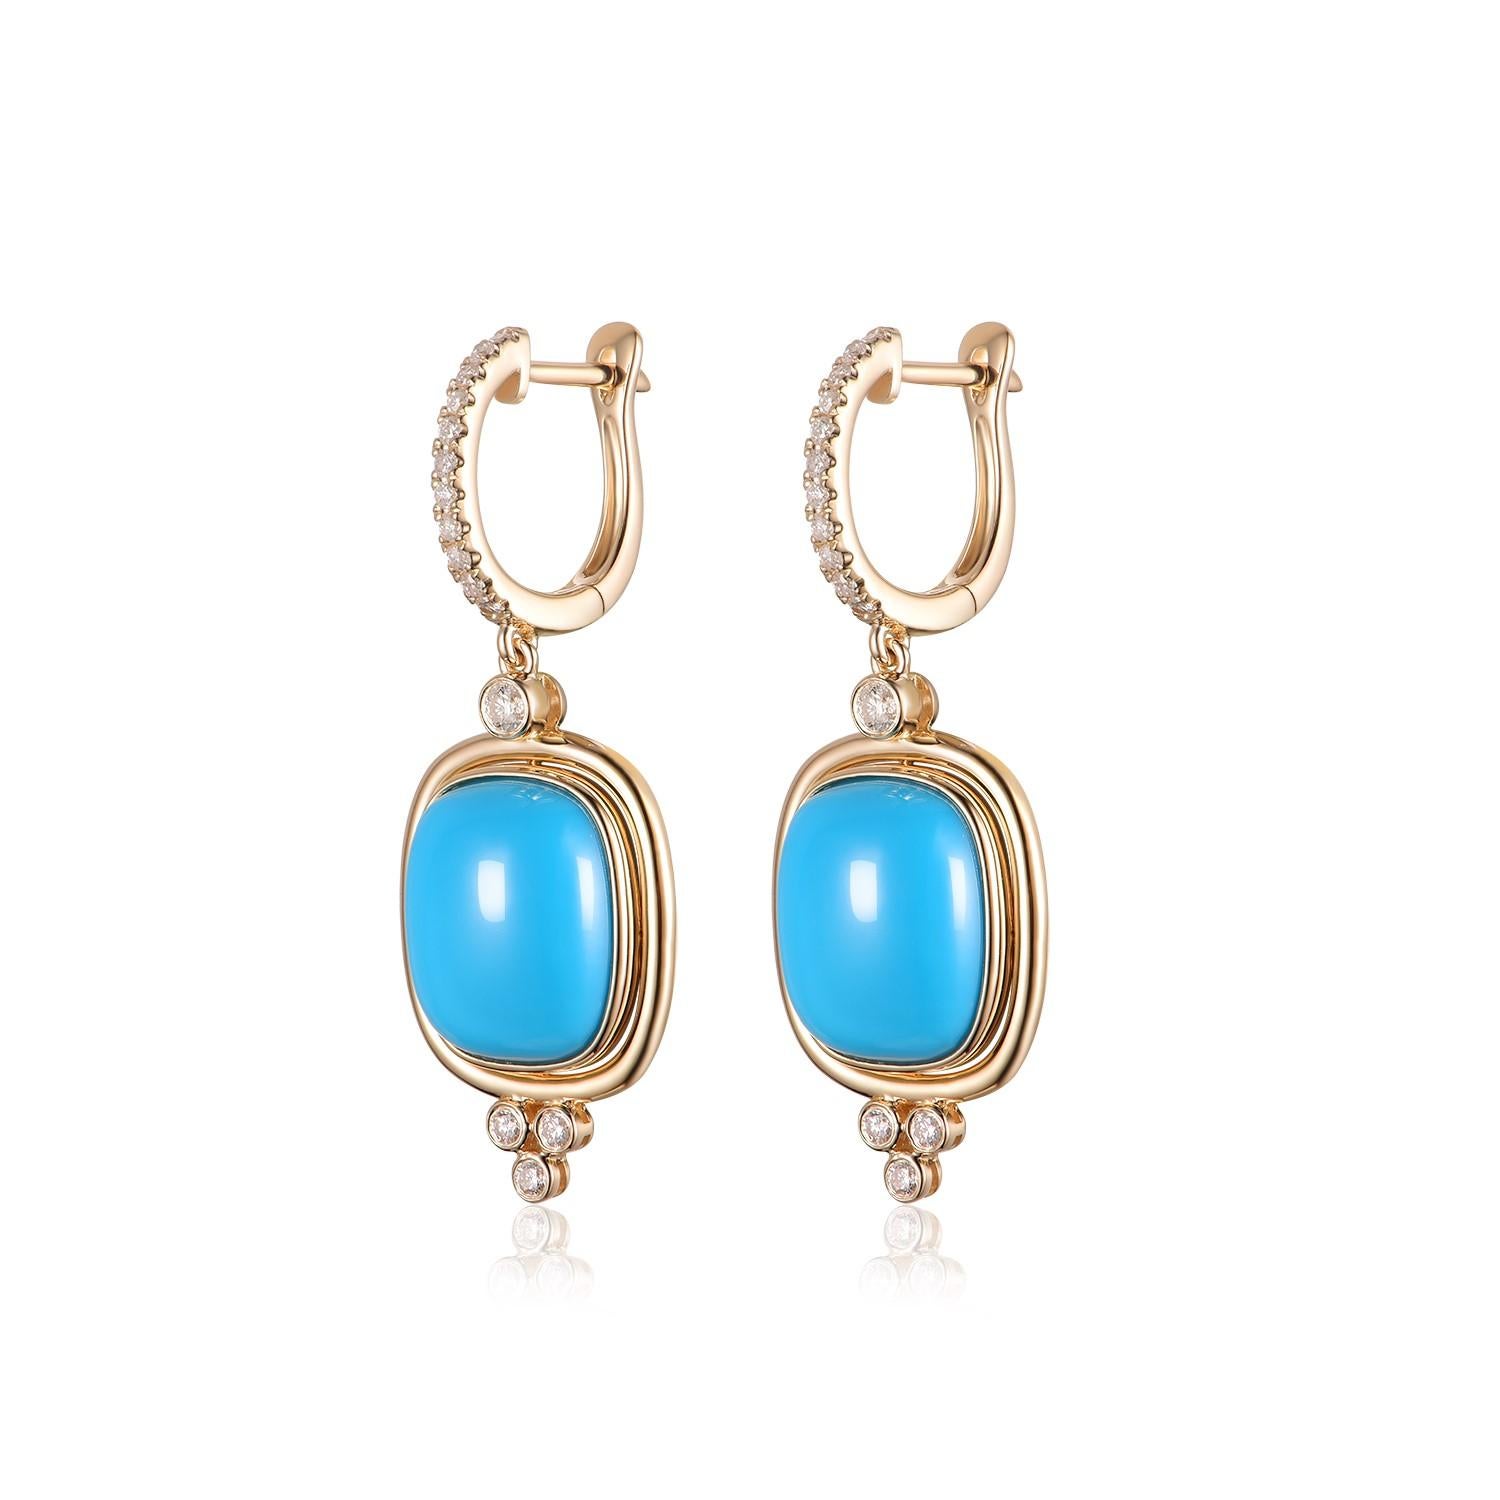 These elegant earrings exude a timeless charm, beautifully blending the serene beauty of Turquoise with the enduring allure of diamonds and yellow gold.

At the center of each earring is a captivating cushion-cut Turquoise, weighing a total of 8.90